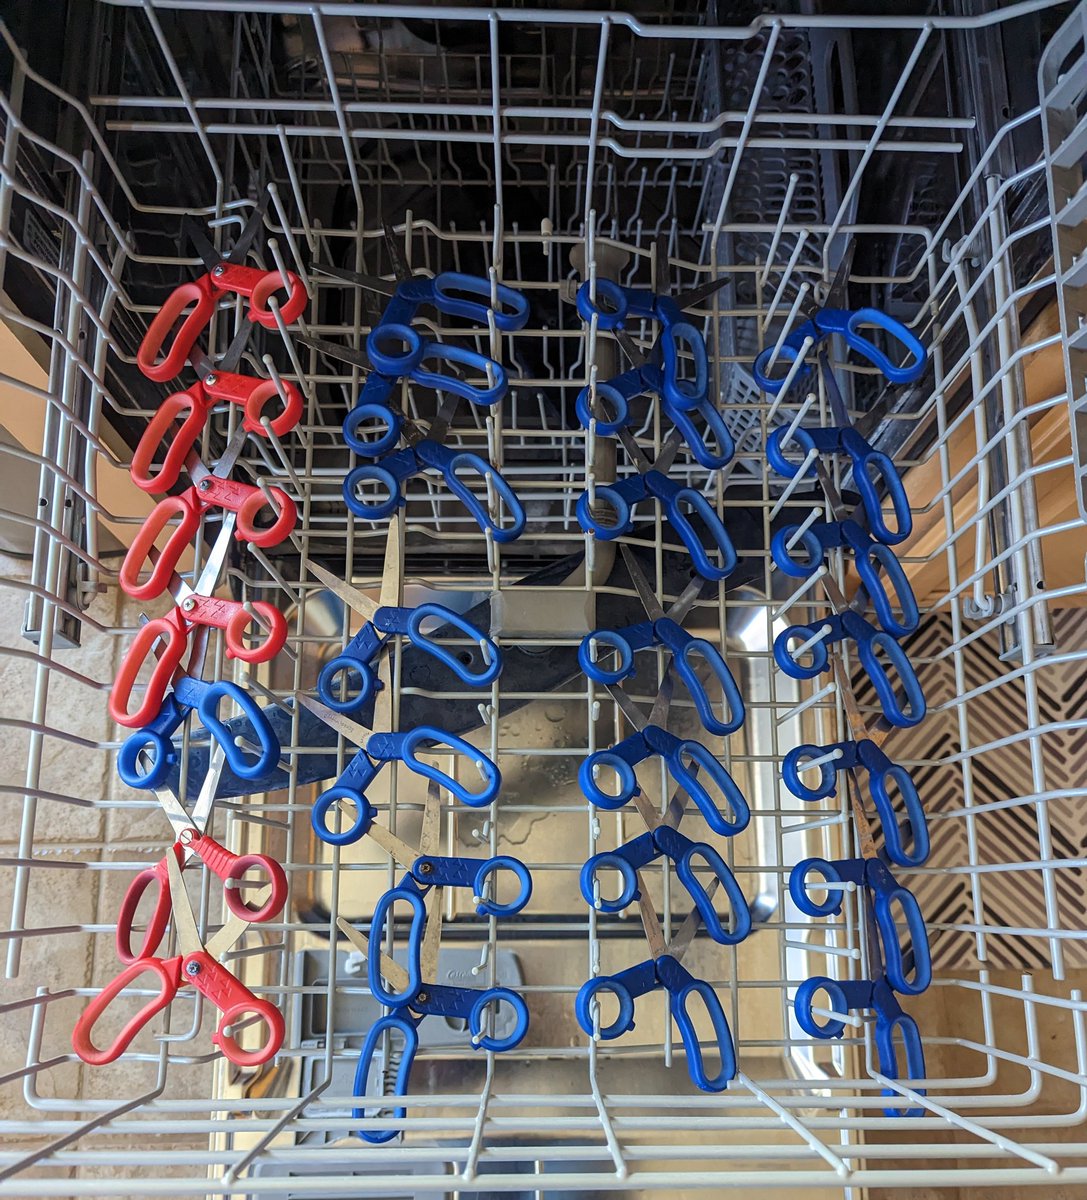 One of the best #TeacherHacks out there!
Do you want your student scissors in the dishwasher?
#PostForPencils #SummerBreak #TeacherLife